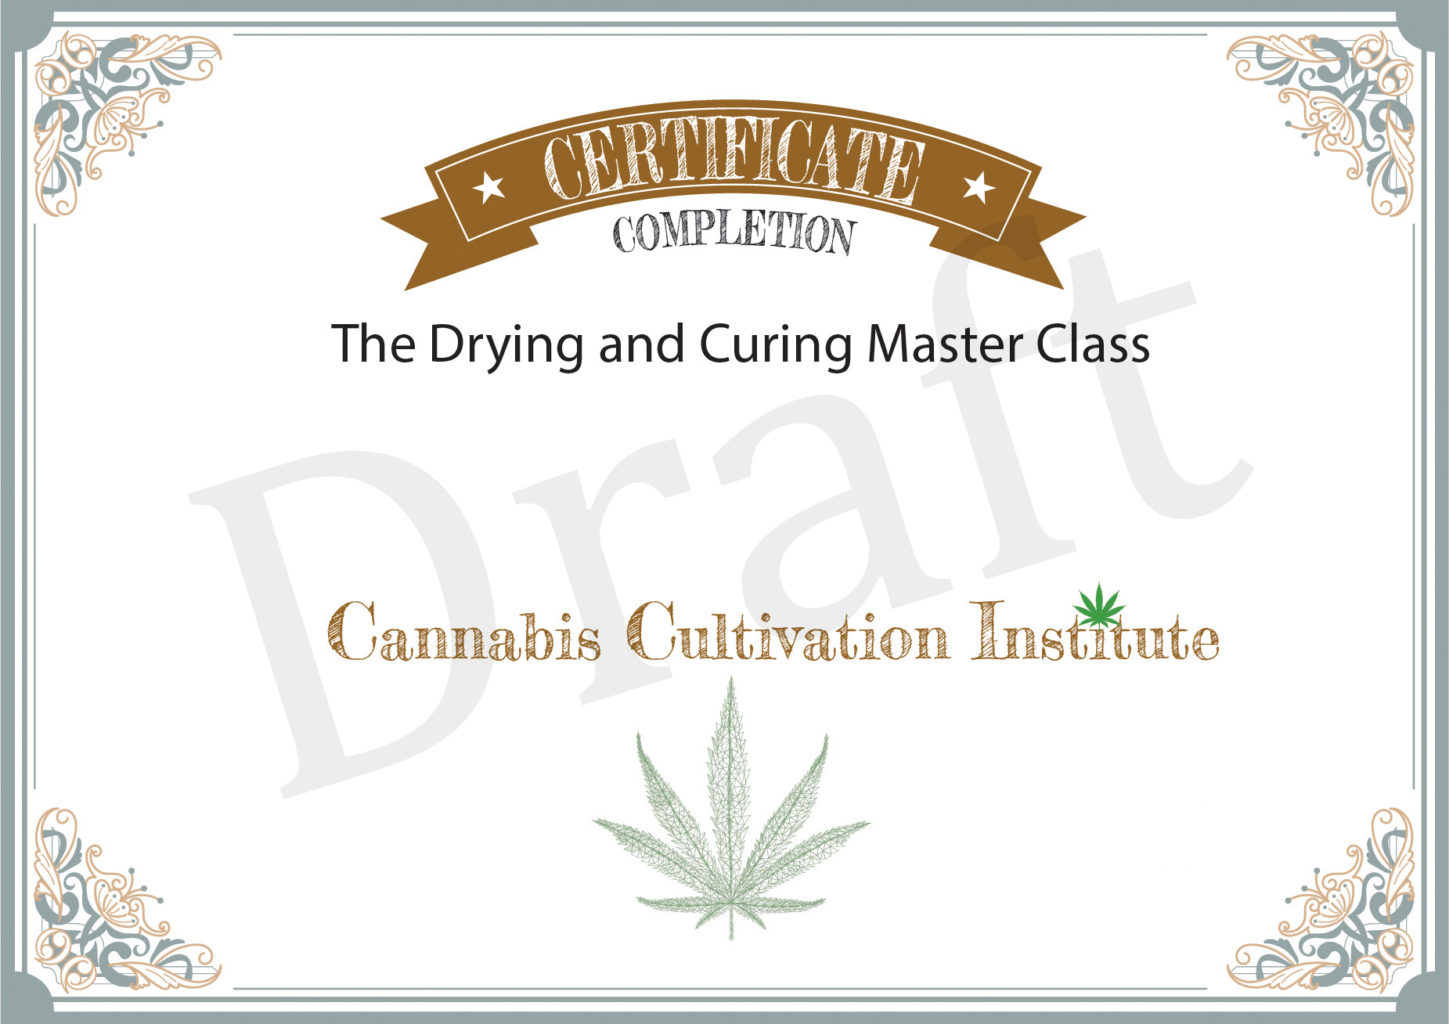 Cannabis drying and curing certificate master class